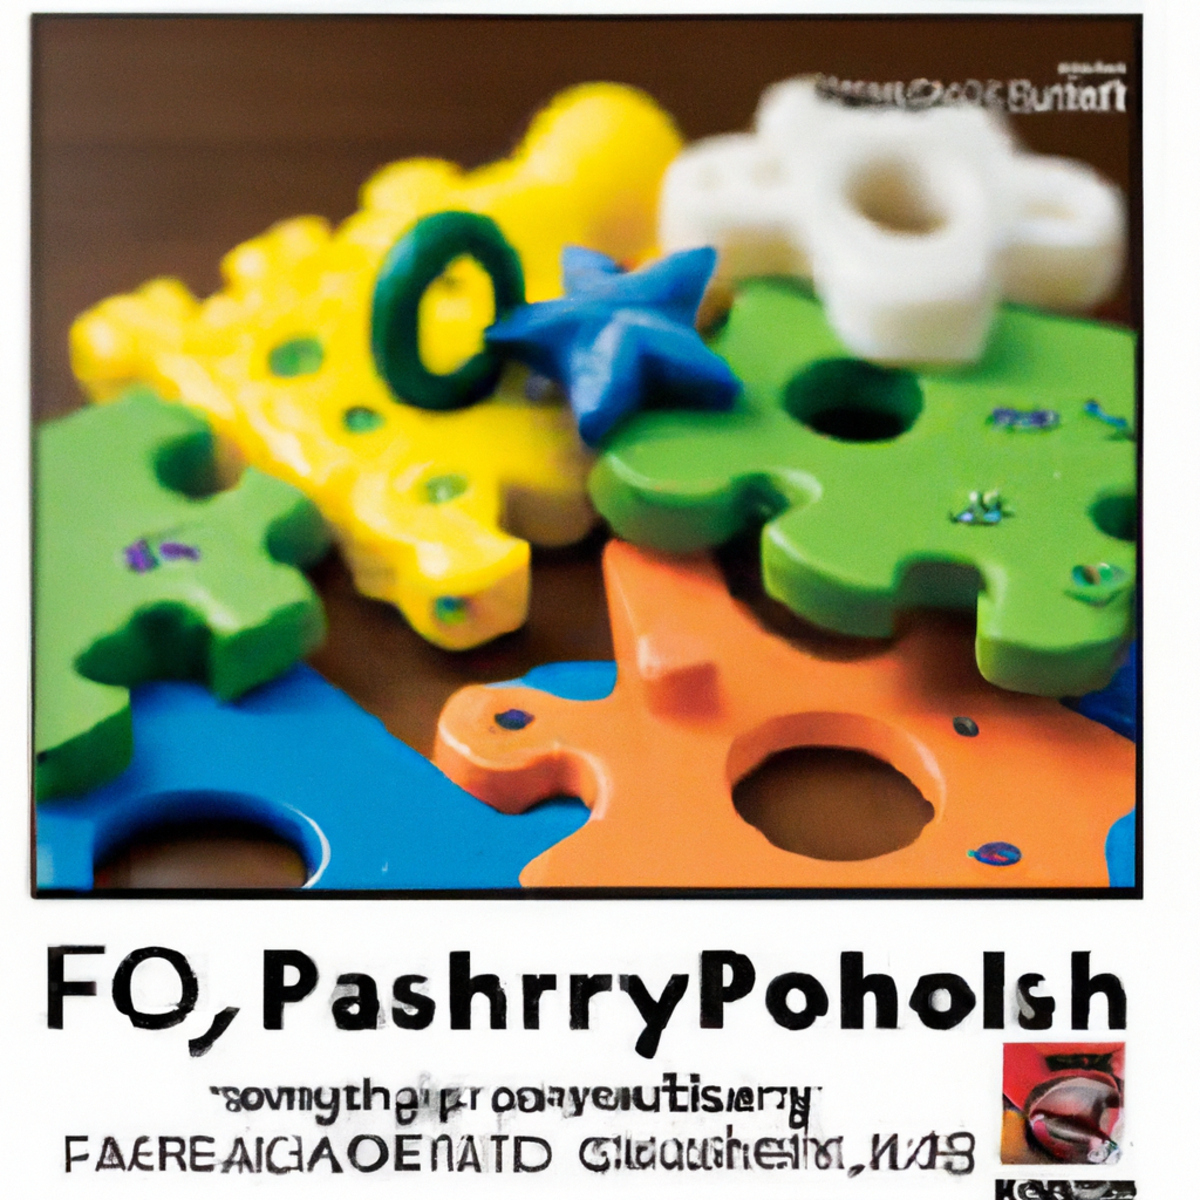 Diverse objects symbolize FOP support: puzzle, oak tree, books, gears. Inspiring image of unity, strength, and hope -Fibrodysplasia Ossificans Progressiva (FOP)